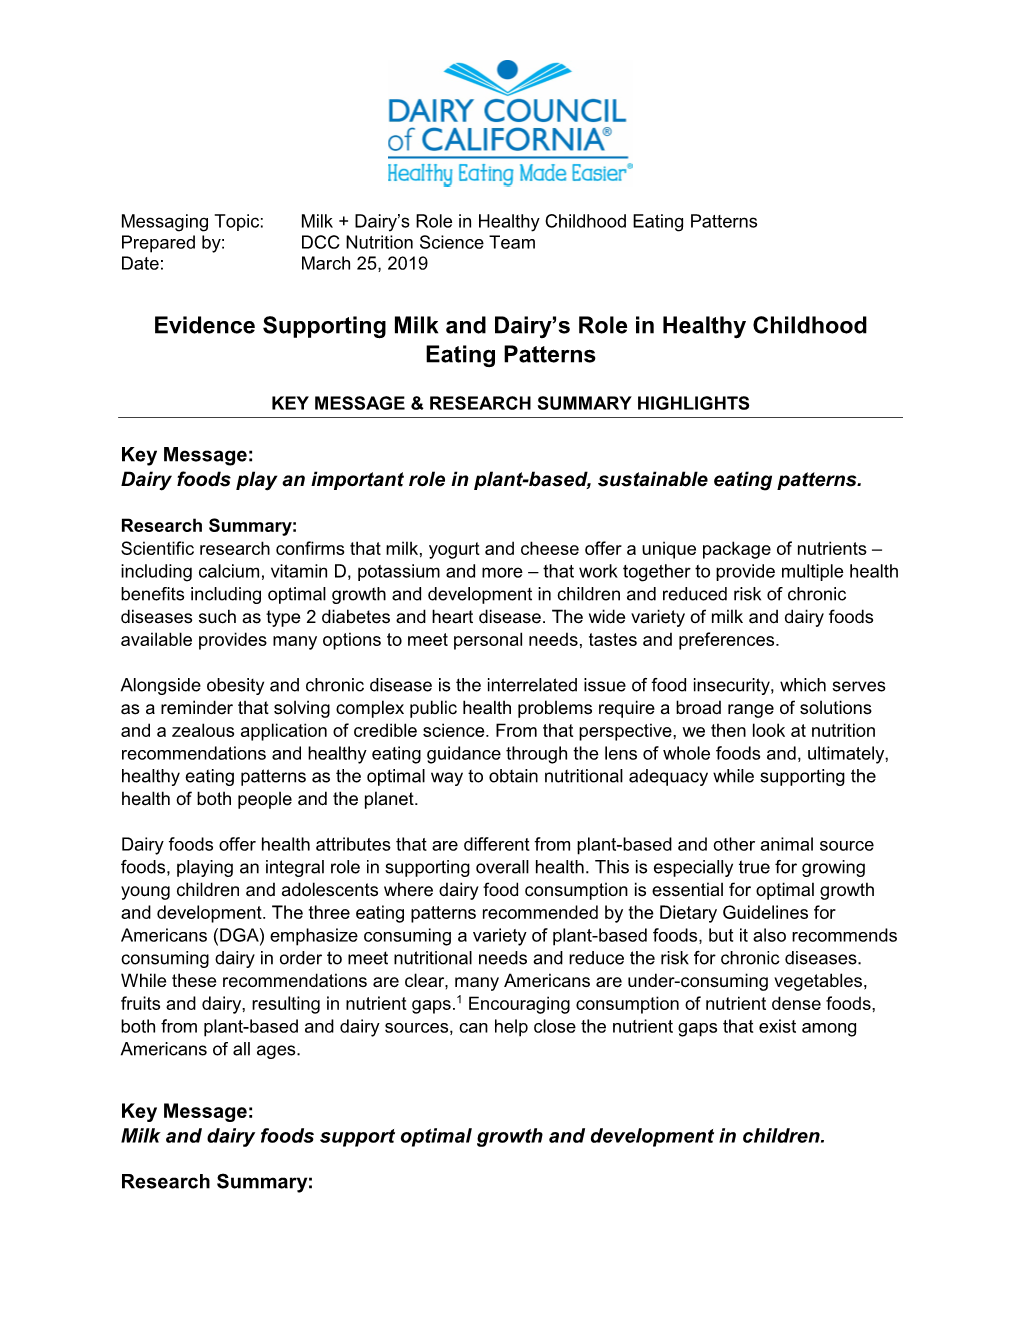 Evidence Supporting Milk and Dairy's Role in Healthy Childhood Eating